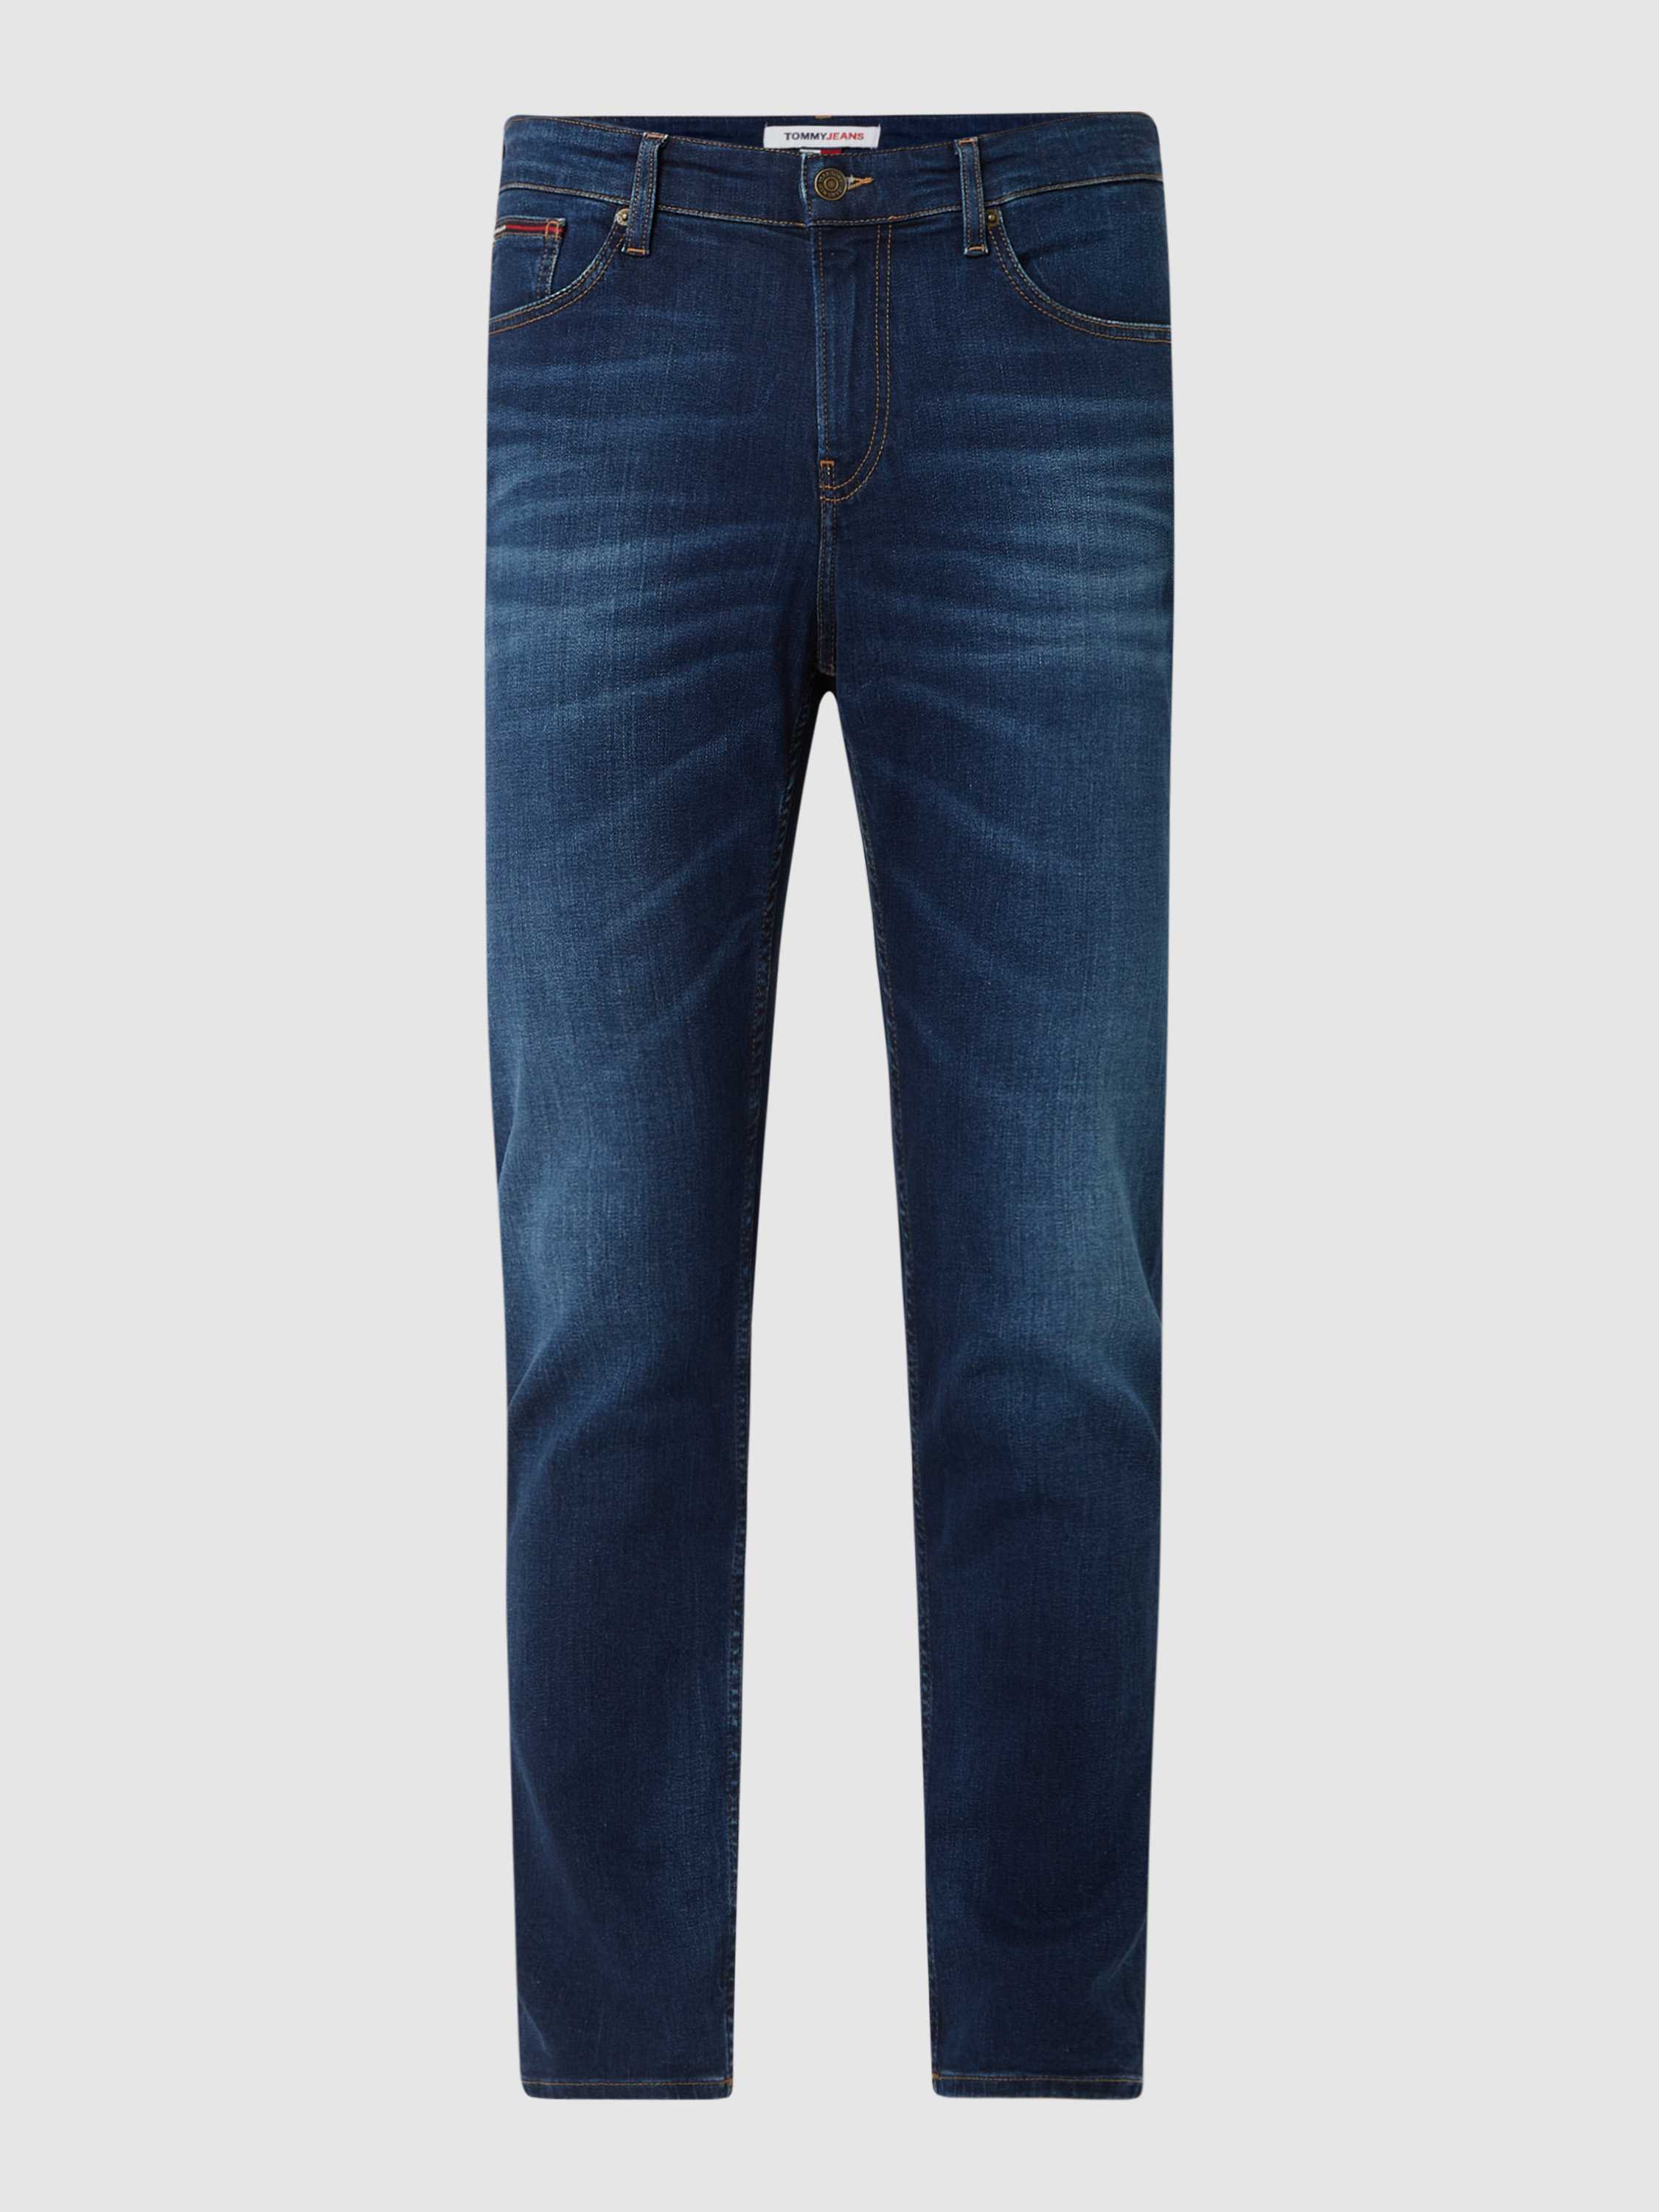 Relaxed Straight Fit Jeans mit Stretch-Anteil Modell 'Ryan'